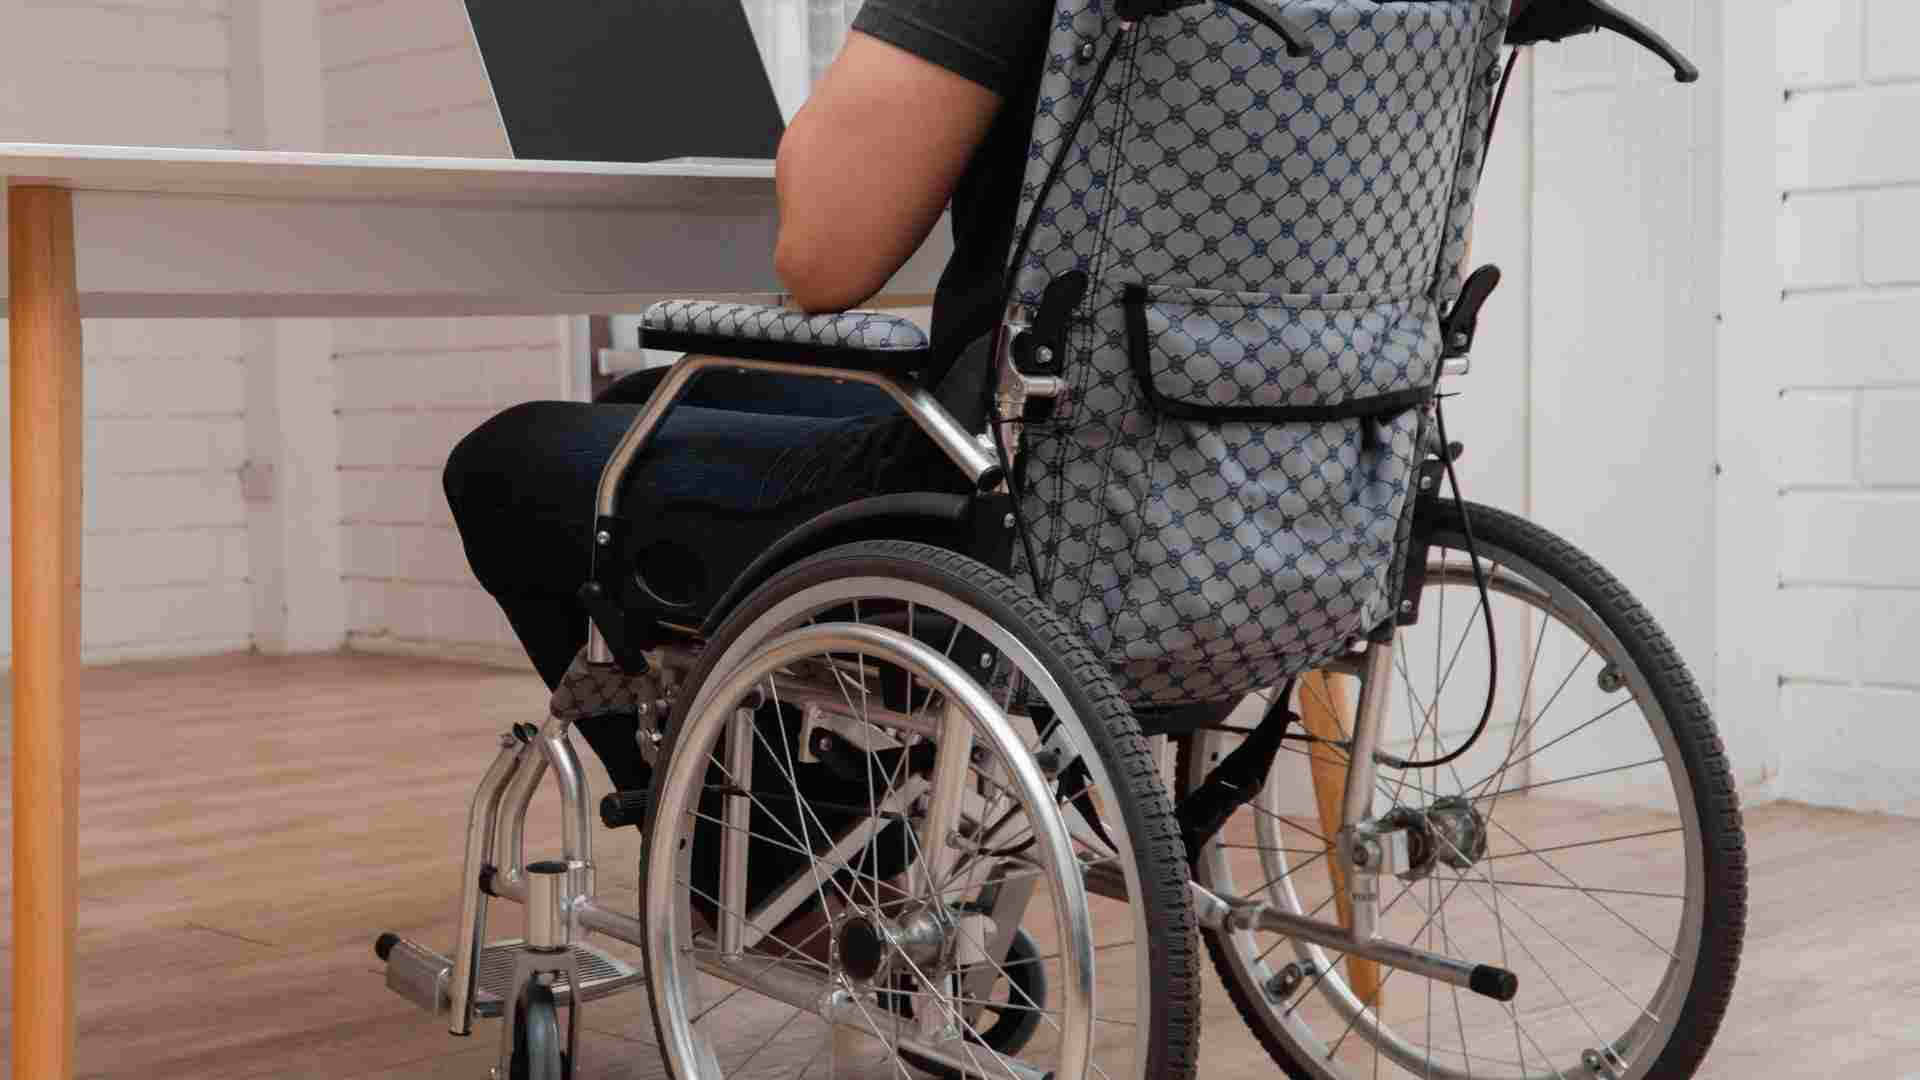 SSDI payments and eligible recipients to cash checks worth up to $3,627